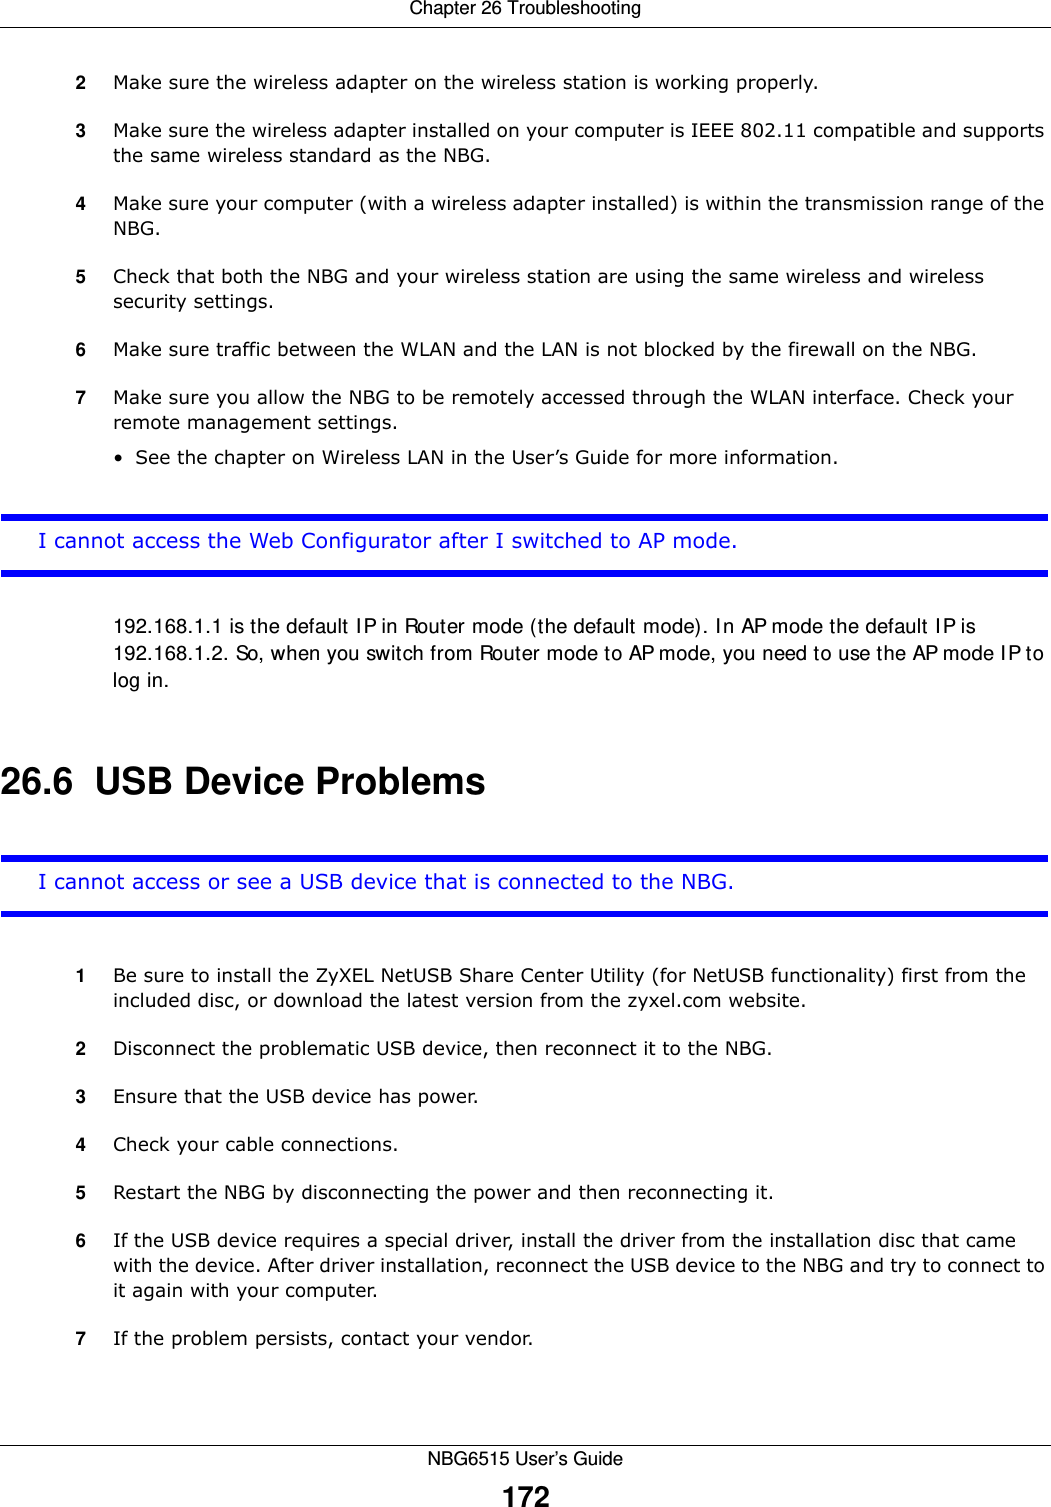 Chapter 26 TroubleshootingNBG6515 User’s Guide1722Make sure the wireless adapter on the wireless station is working properly.3Make sure the wireless adapter installed on your computer is IEEE 802.11 compatible and supports the same wireless standard as the NBG.4Make sure your computer (with a wireless adapter installed) is within the transmission range of the NBG.5Check that both the NBG and your wireless station are using the same wireless and wireless security settings.6Make sure traffic between the WLAN and the LAN is not blocked by the firewall on the NBG. 7Make sure you allow the NBG to be remotely accessed through the WLAN interface. Check your remote management settings.• See the chapter on Wireless LAN in the User’s Guide for more information.I cannot access the Web Configurator after I switched to AP mode.192.168.1.1 is the default IP in Router mode (the default mode). In AP mode the default IP is 192.168.1.2. So, when you switch from Router mode to AP mode, you need to use the AP mode IP to log in.26.6  USB Device ProblemsI cannot access or see a USB device that is connected to the NBG.1Be sure to install the ZyXEL NetUSB Share Center Utility (for NetUSB functionality) first from the included disc, or download the latest version from the zyxel.com website.2Disconnect the problematic USB device, then reconnect it to the NBG.3Ensure that the USB device has power.4Check your cable connections.5Restart the NBG by disconnecting the power and then reconnecting it.6If the USB device requires a special driver, install the driver from the installation disc that came with the device. After driver installation, reconnect the USB device to the NBG and try to connect to it again with your computer.7If the problem persists, contact your vendor.